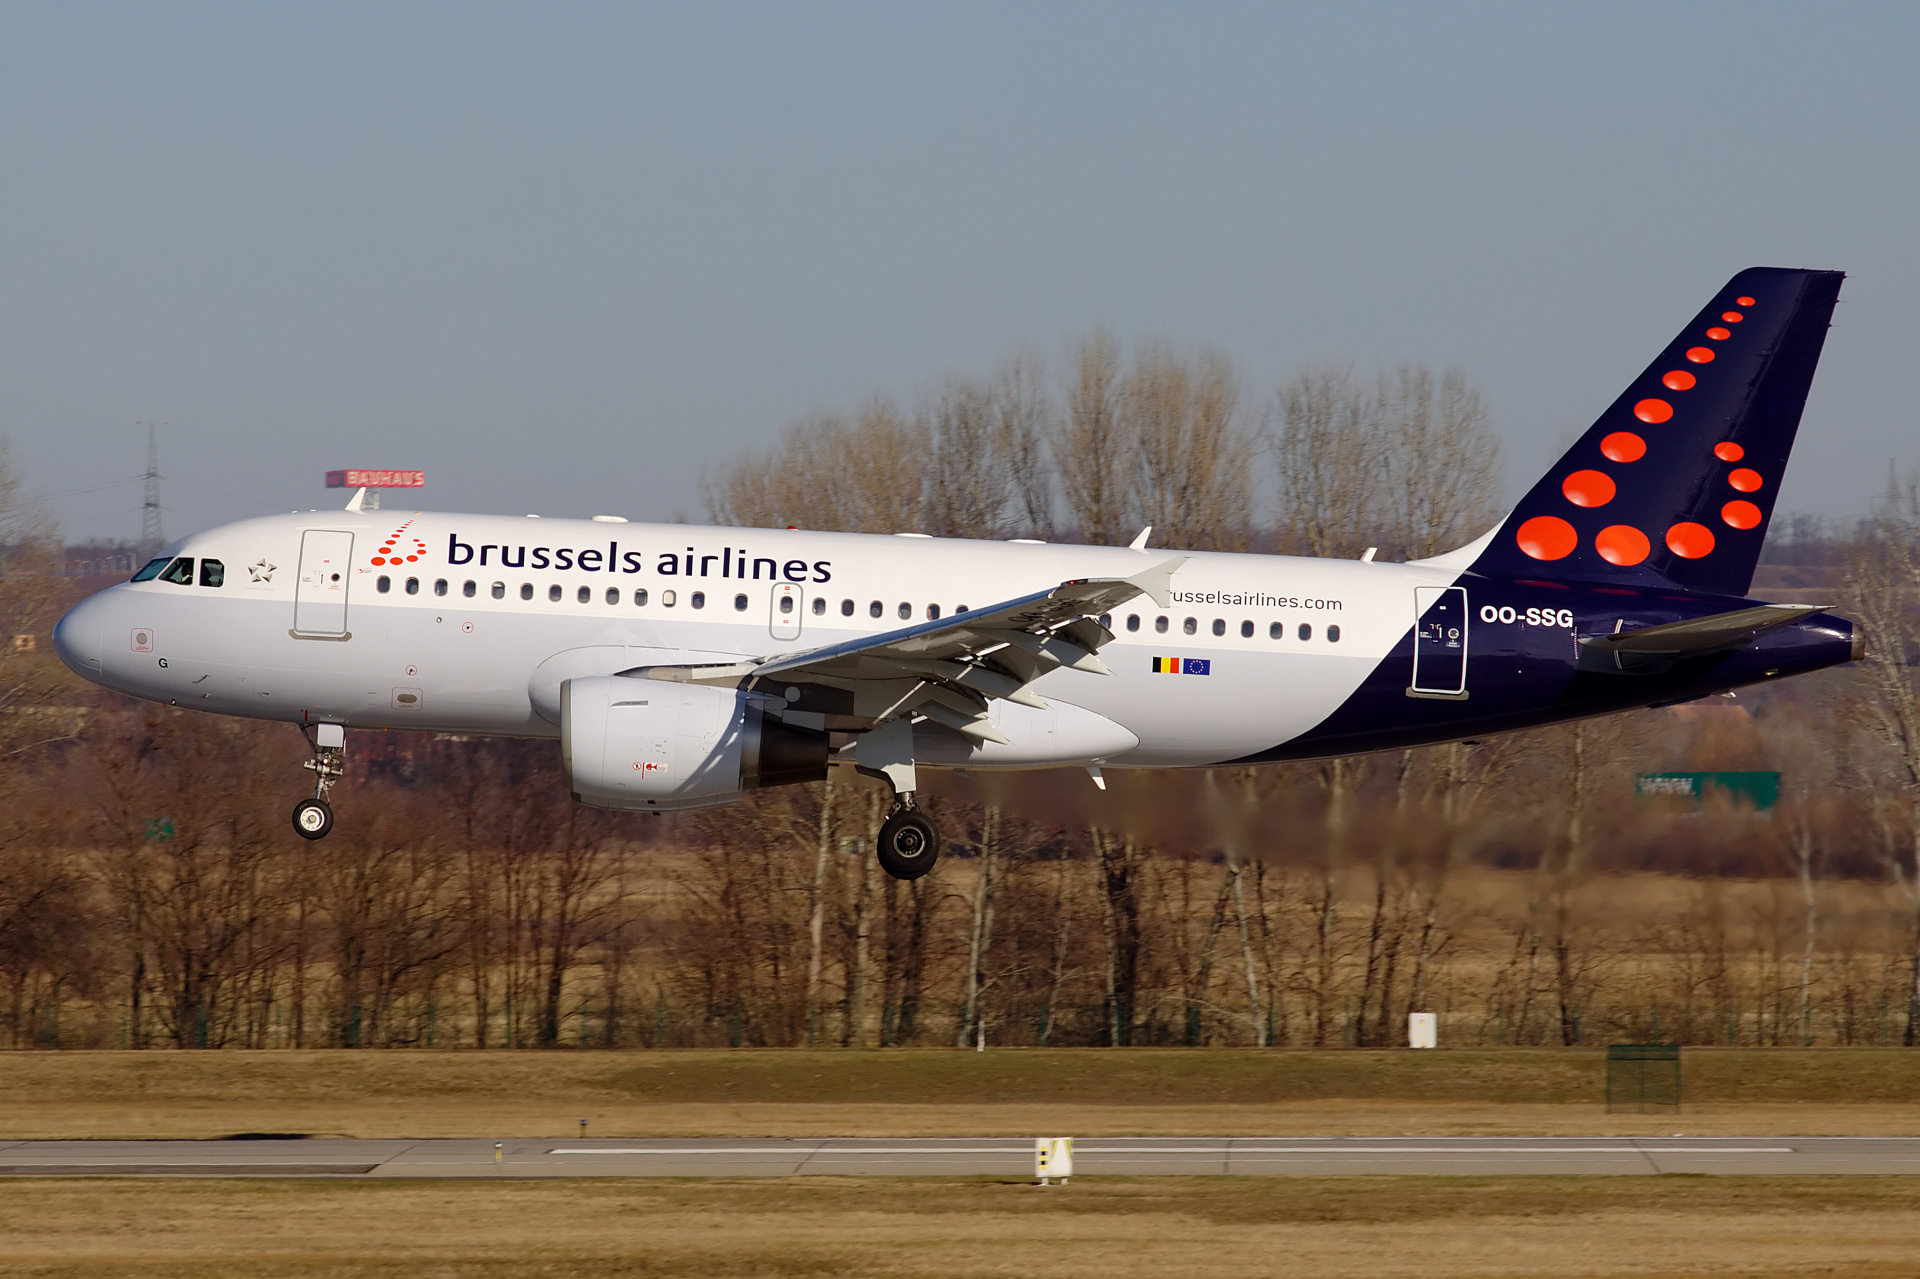 OO-SSG, Brussels Airlines (Aircraft » Ferihegy Spotting » Airbus A319-100)